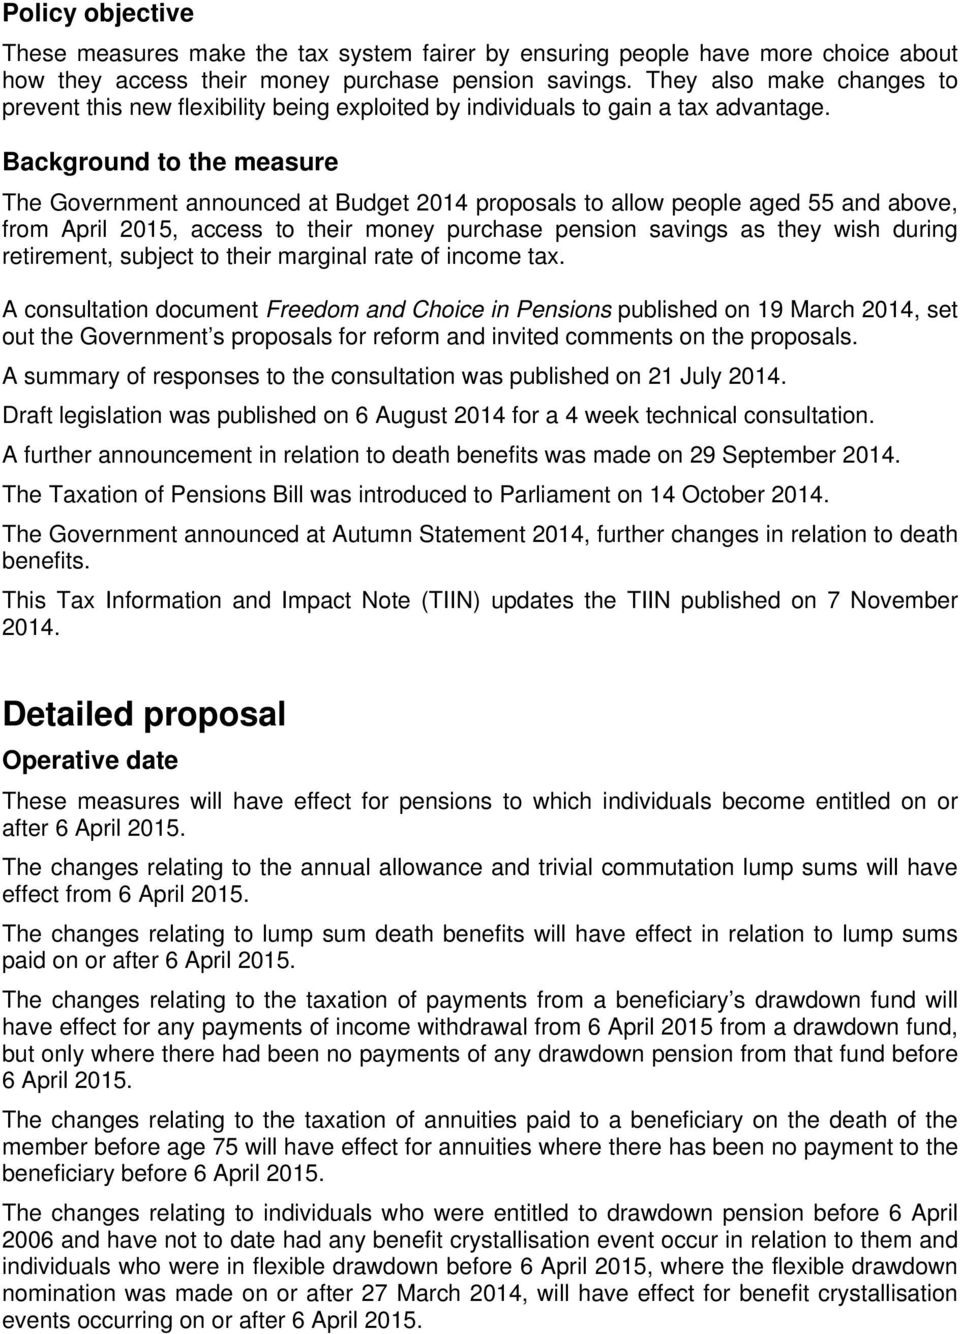 Background to the measure The Government announced at Budget 2014 proposals to allow people aged 55 and above, from April 2015, access to their money purchase pension savings as they wish during